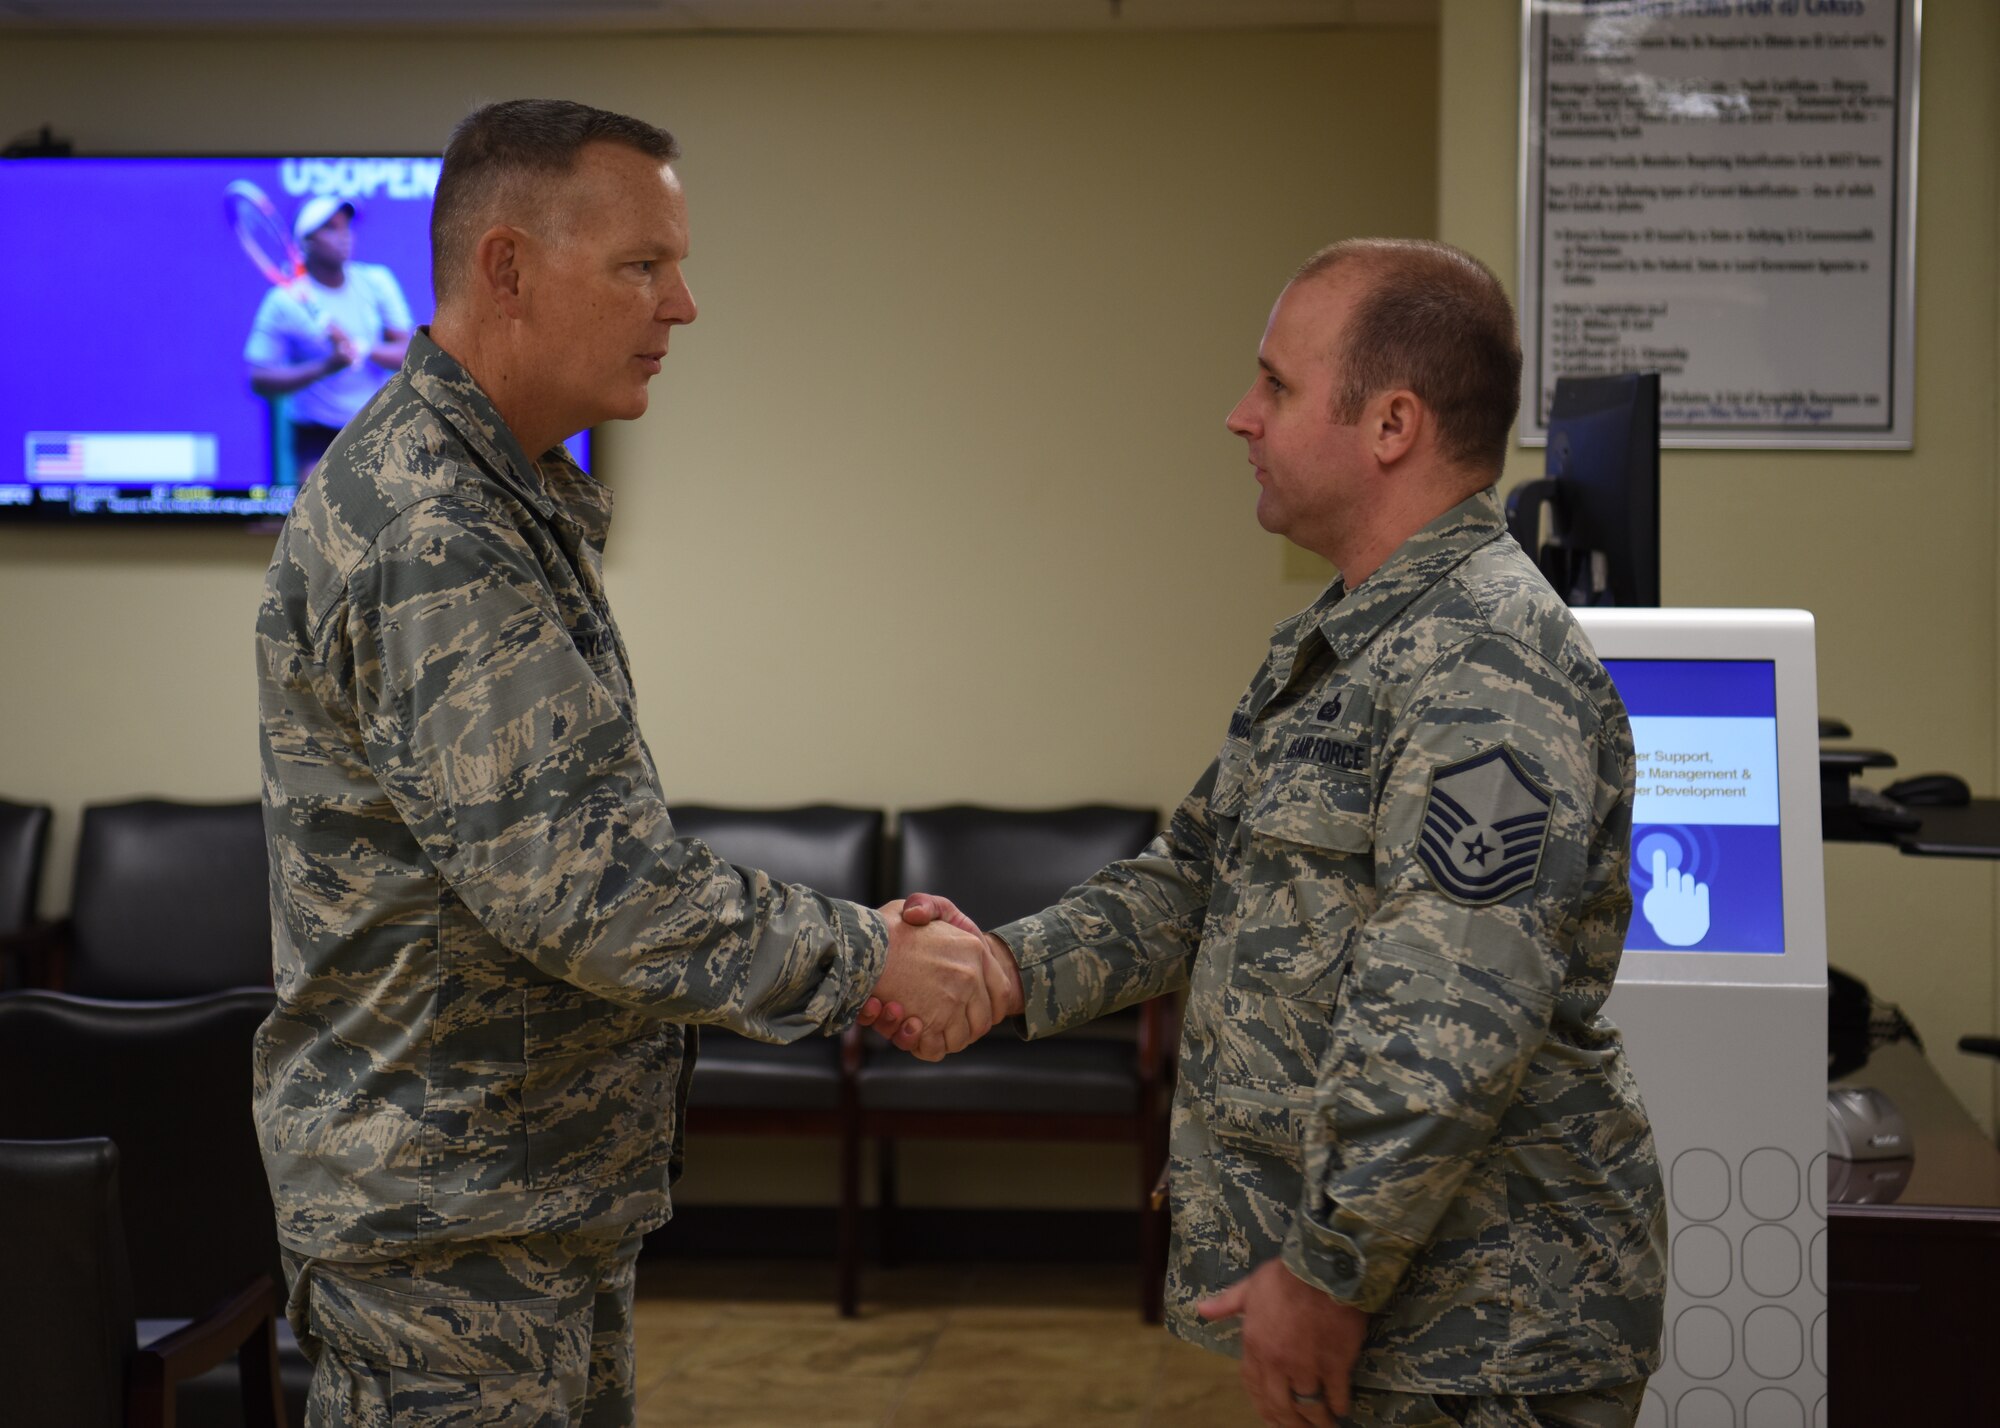 U.S. Air Force Master Sgt. Sean O’Hagan, 56th Force Support Squadron section chief, receives a challenge coin from U.S. Air Force Col. Robert Sylvester, 56th Mission Support Group commander, for his key role in finalizing the implementation of the check-in kiosk Aug. 29, 2018 at Luke Air Force Base, Ariz.